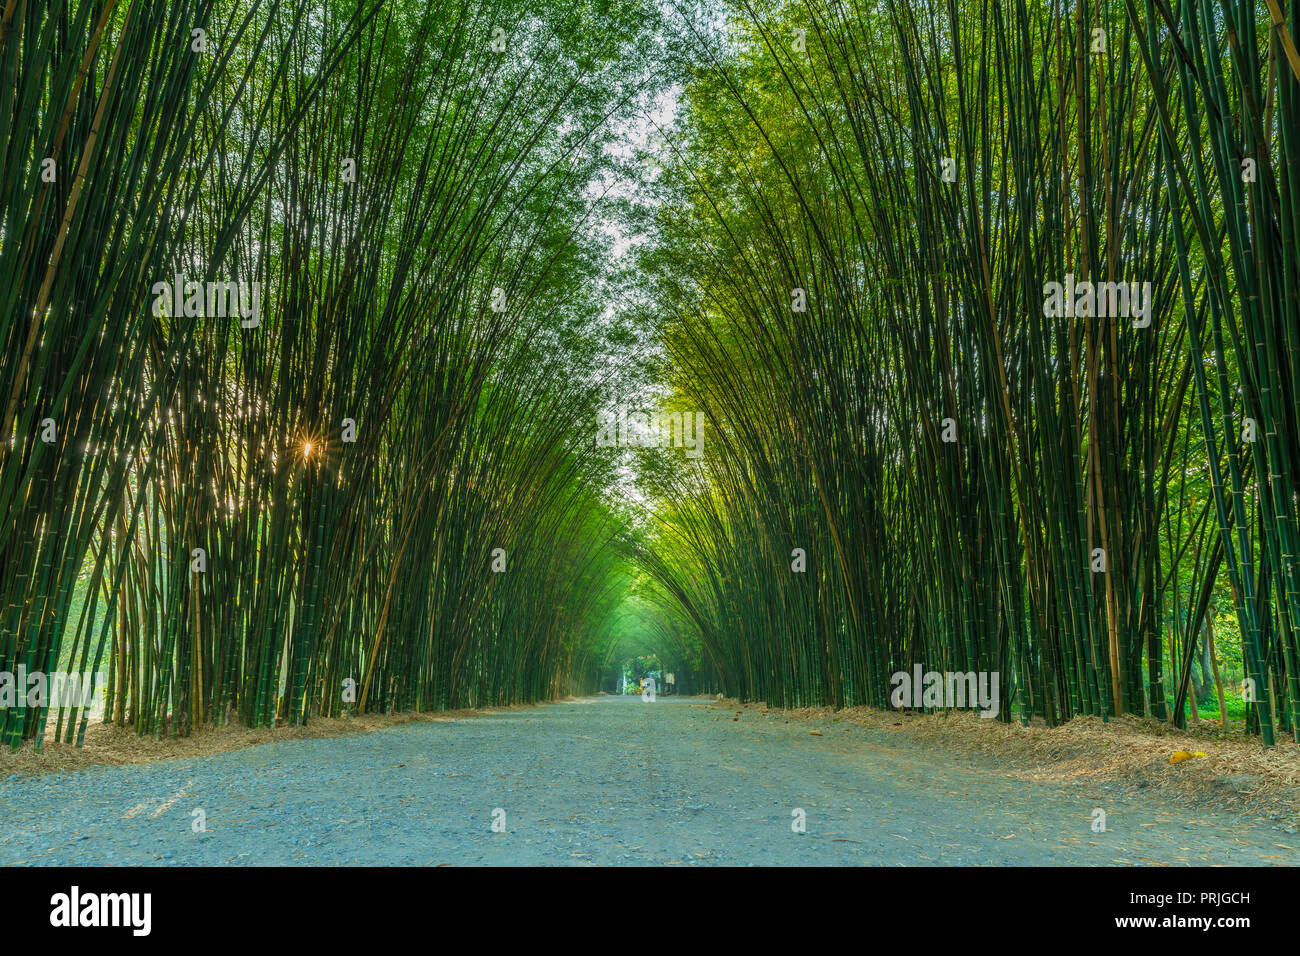 Natural bamboo arch on both side of the walking path leading to Eakkachat temple in Nakornnayok province, Thailand. Stock Photo